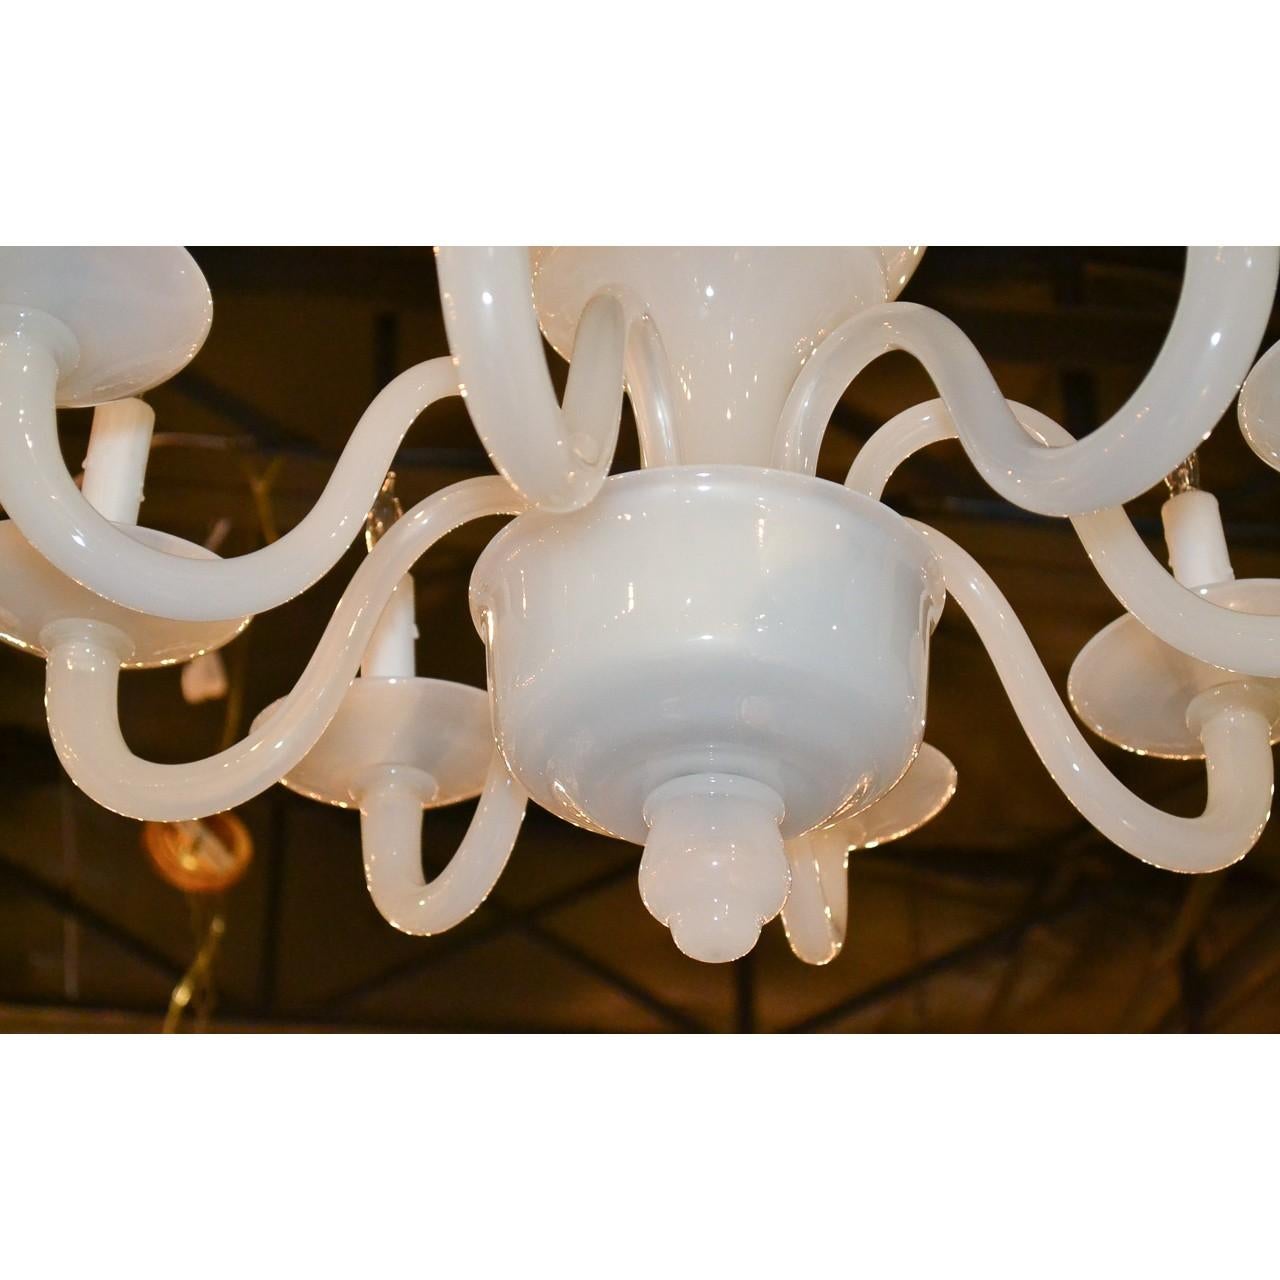 Exceptional midcentury Italian Murano milk glass chandelier with a bulbous-formed stem surmounted with eight gracefully contoured s-shaped branches and simplistic bobeche. Classic style, Classic look,

circa 1940.